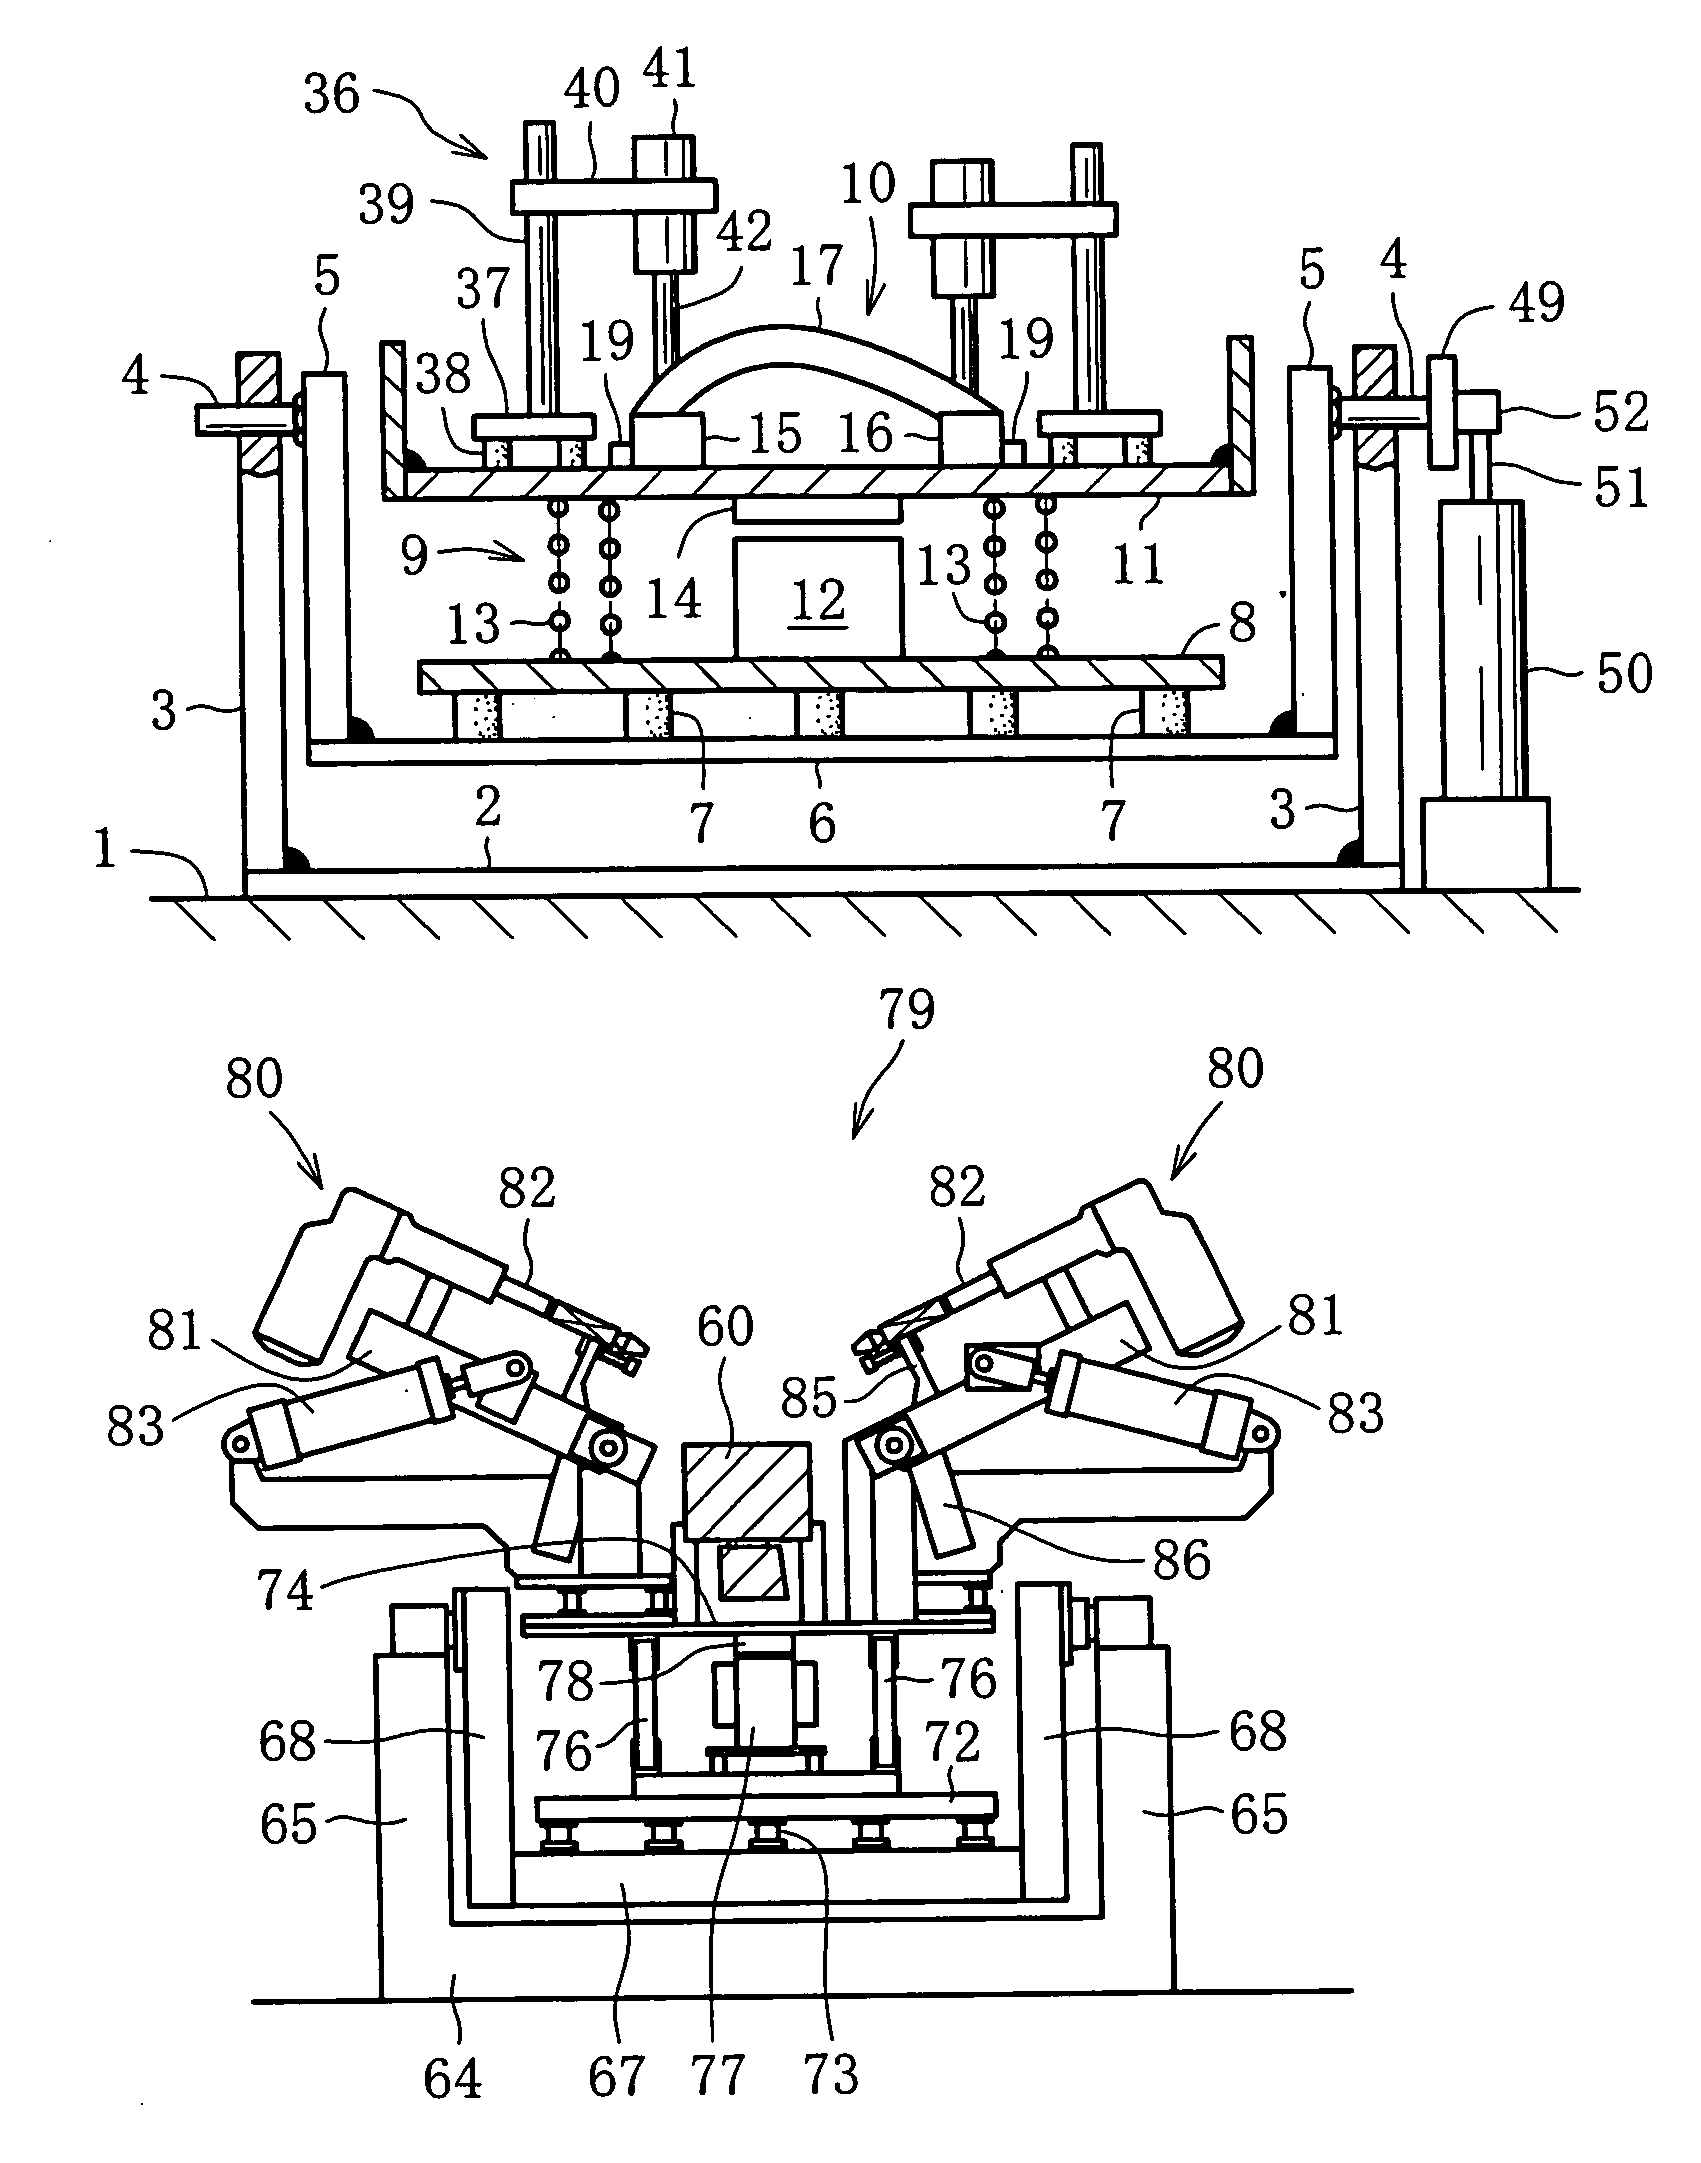 Device for removing sand from casting